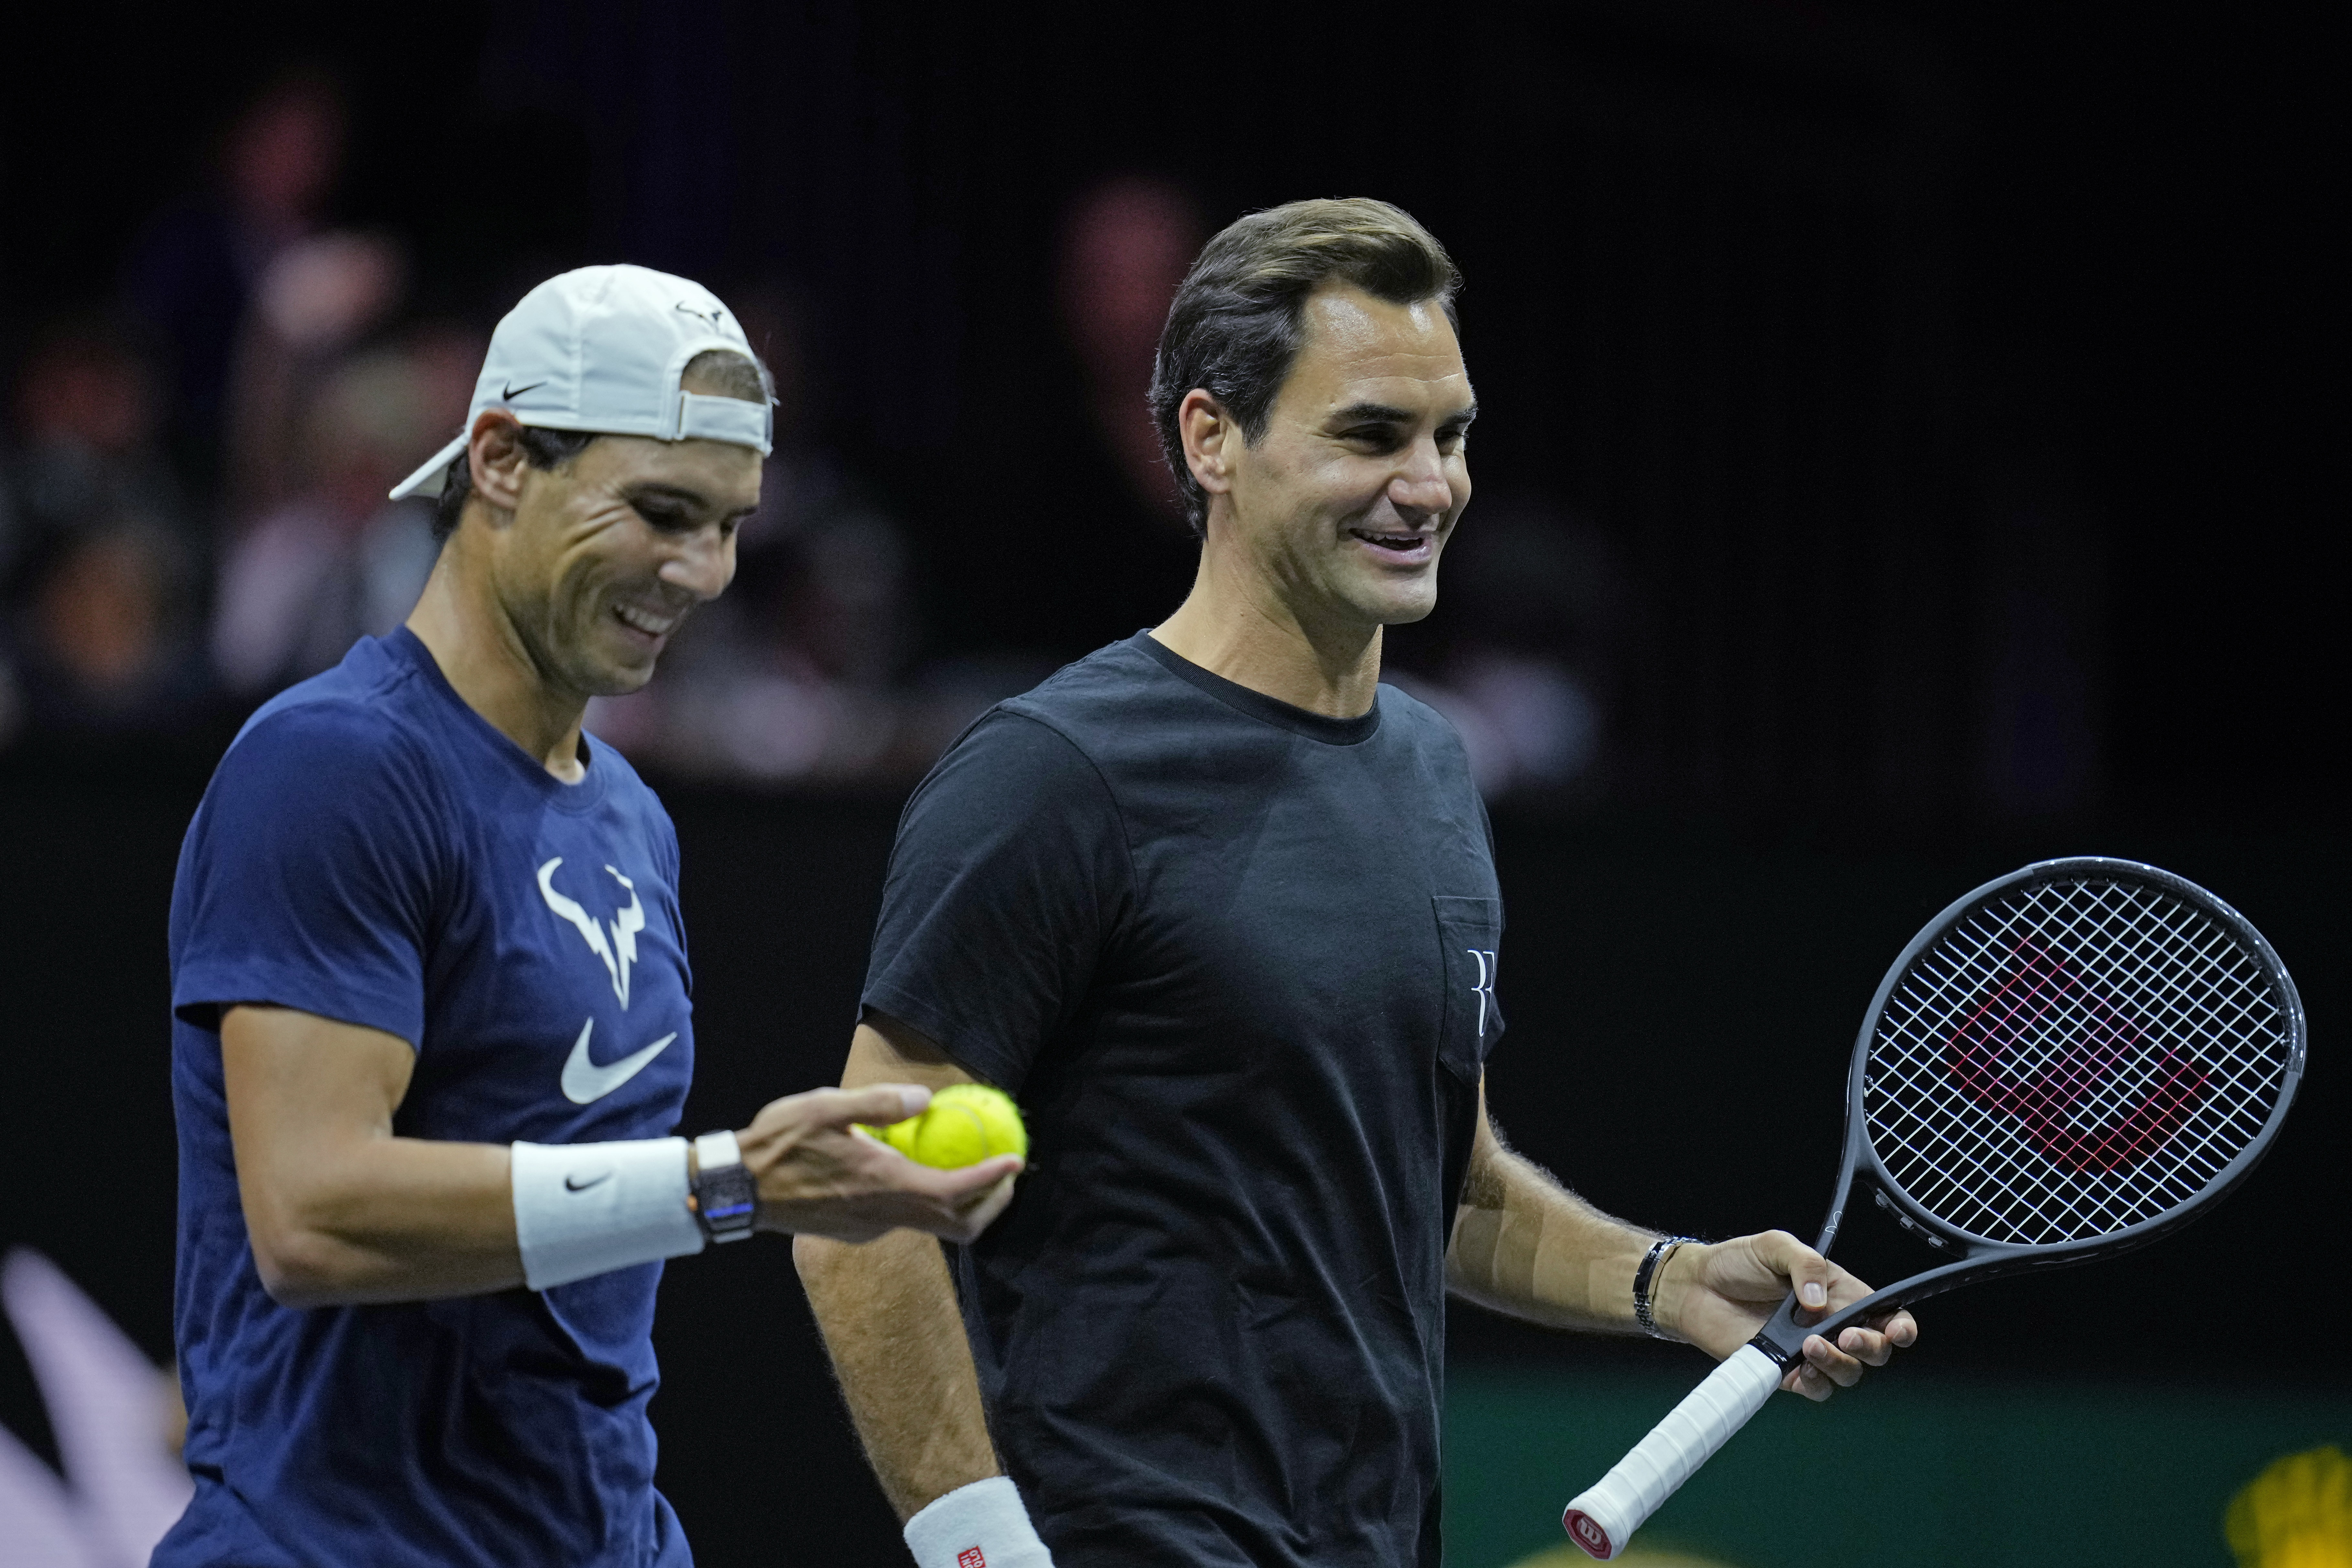 Roger Federers final match comes in doubles alongside rival Rafael Nadal